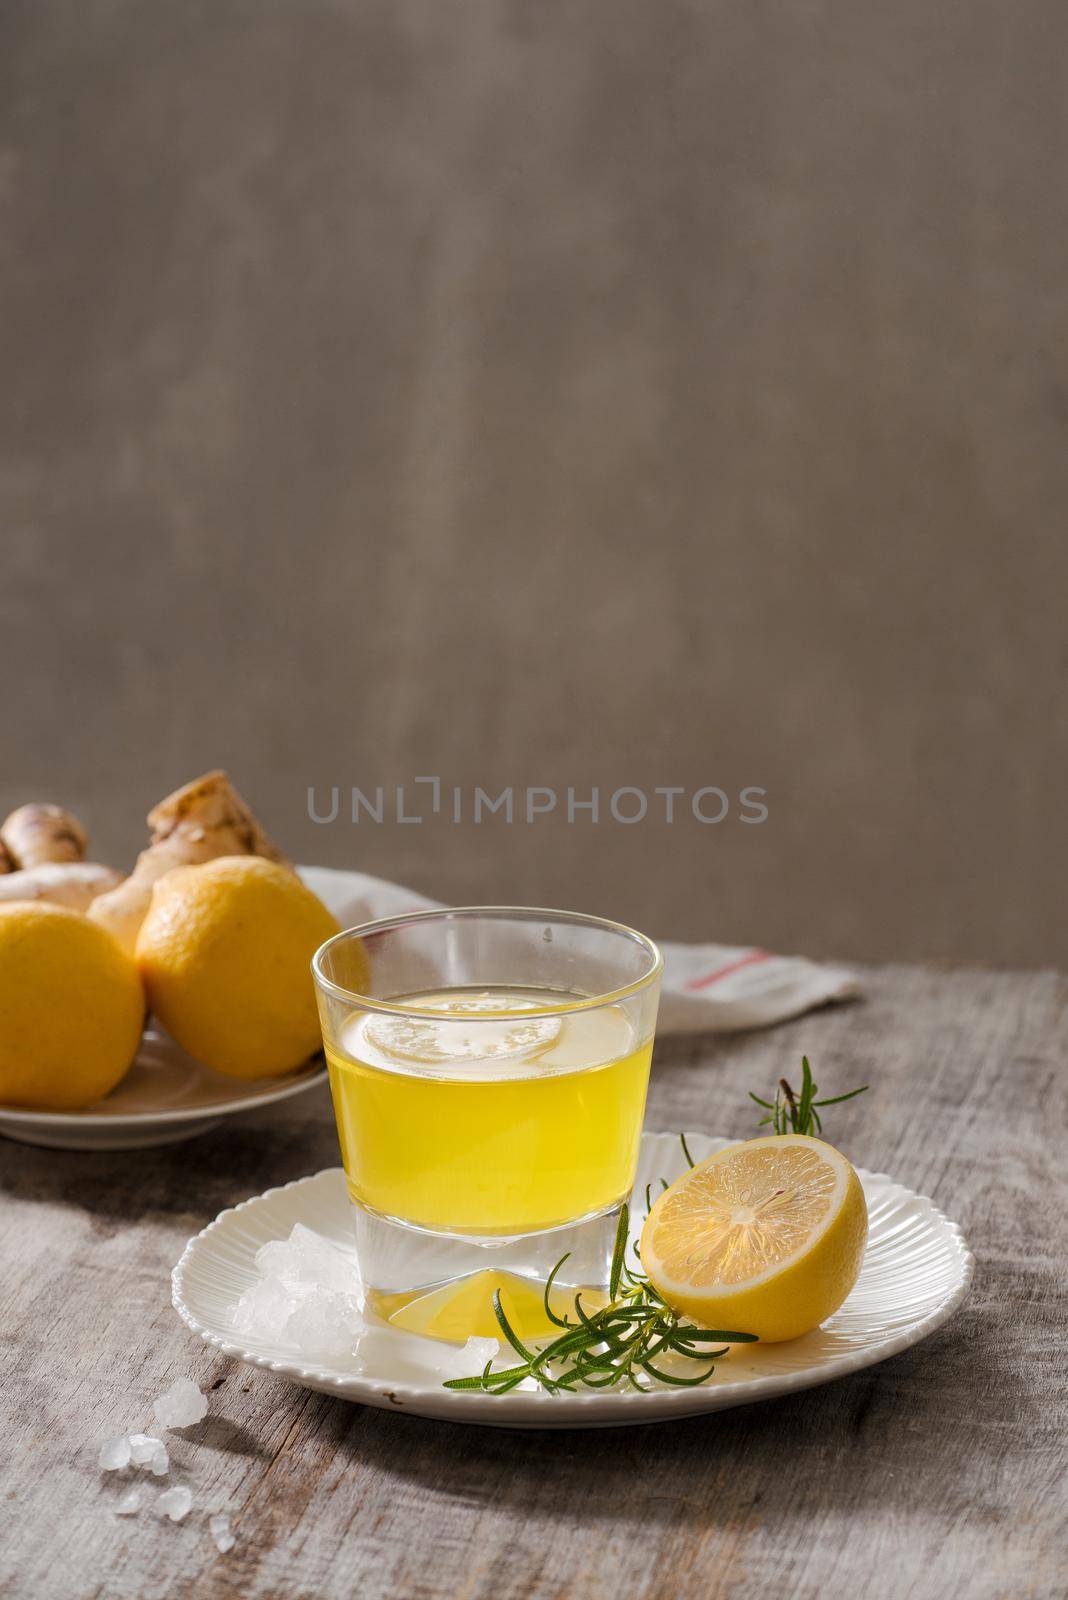 Ginger tea with lemon, ginger root and rosemarry on wooden background. Small glass transparent pitcher with hot drink. Seasonal beverages. Shallow DOF, selective focus, focus on top of pitcher.